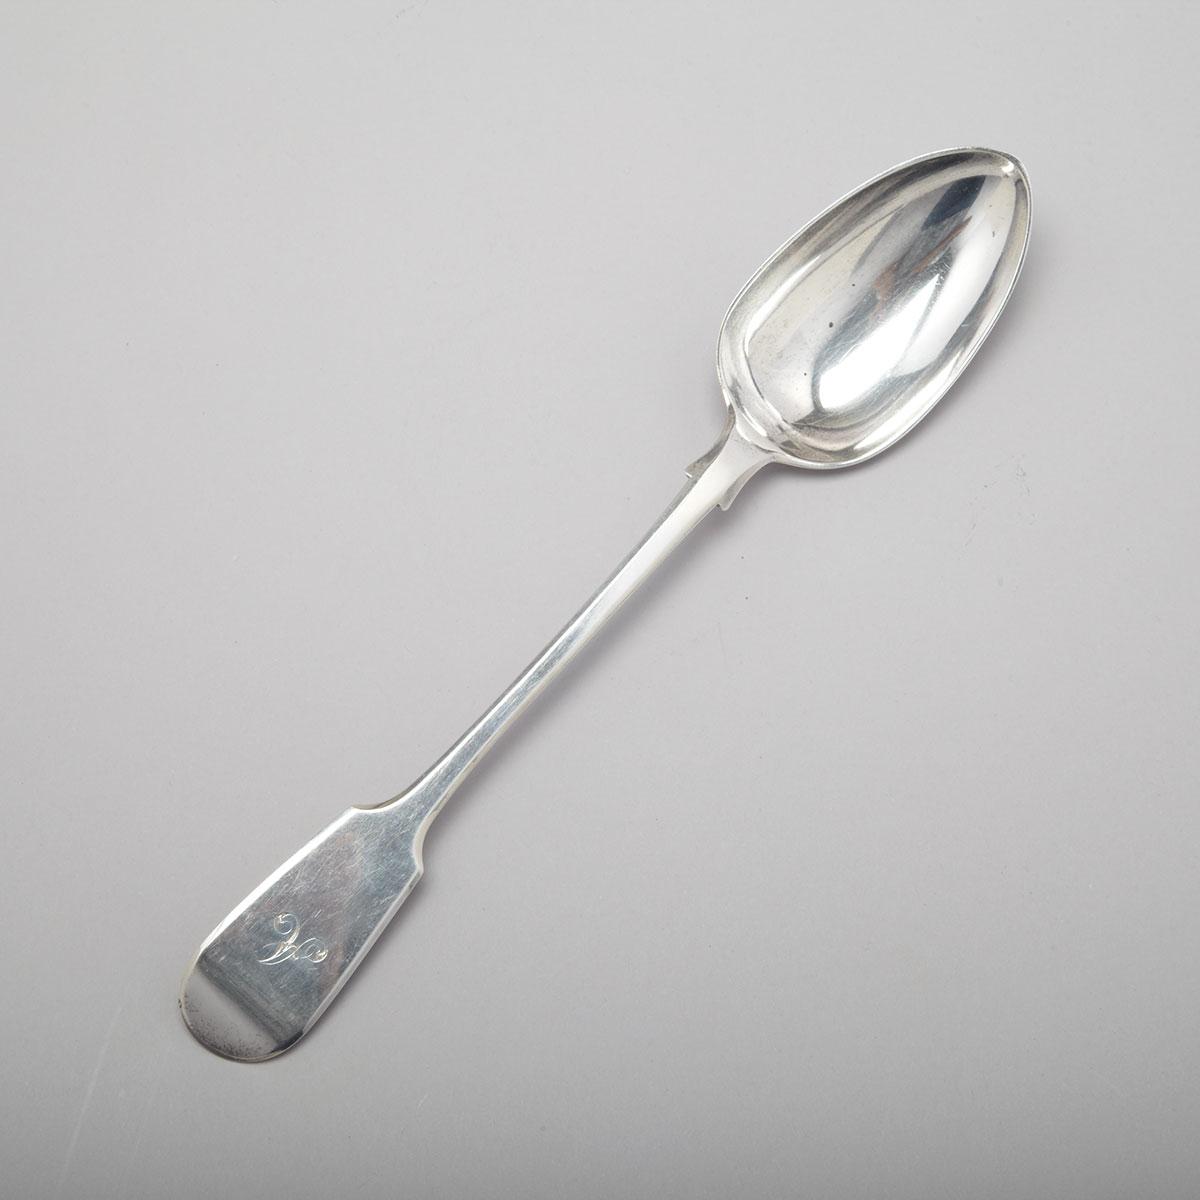 Victorian Silver Fiddle Pattern Serving Spoon, John James Whiting, London, 1845